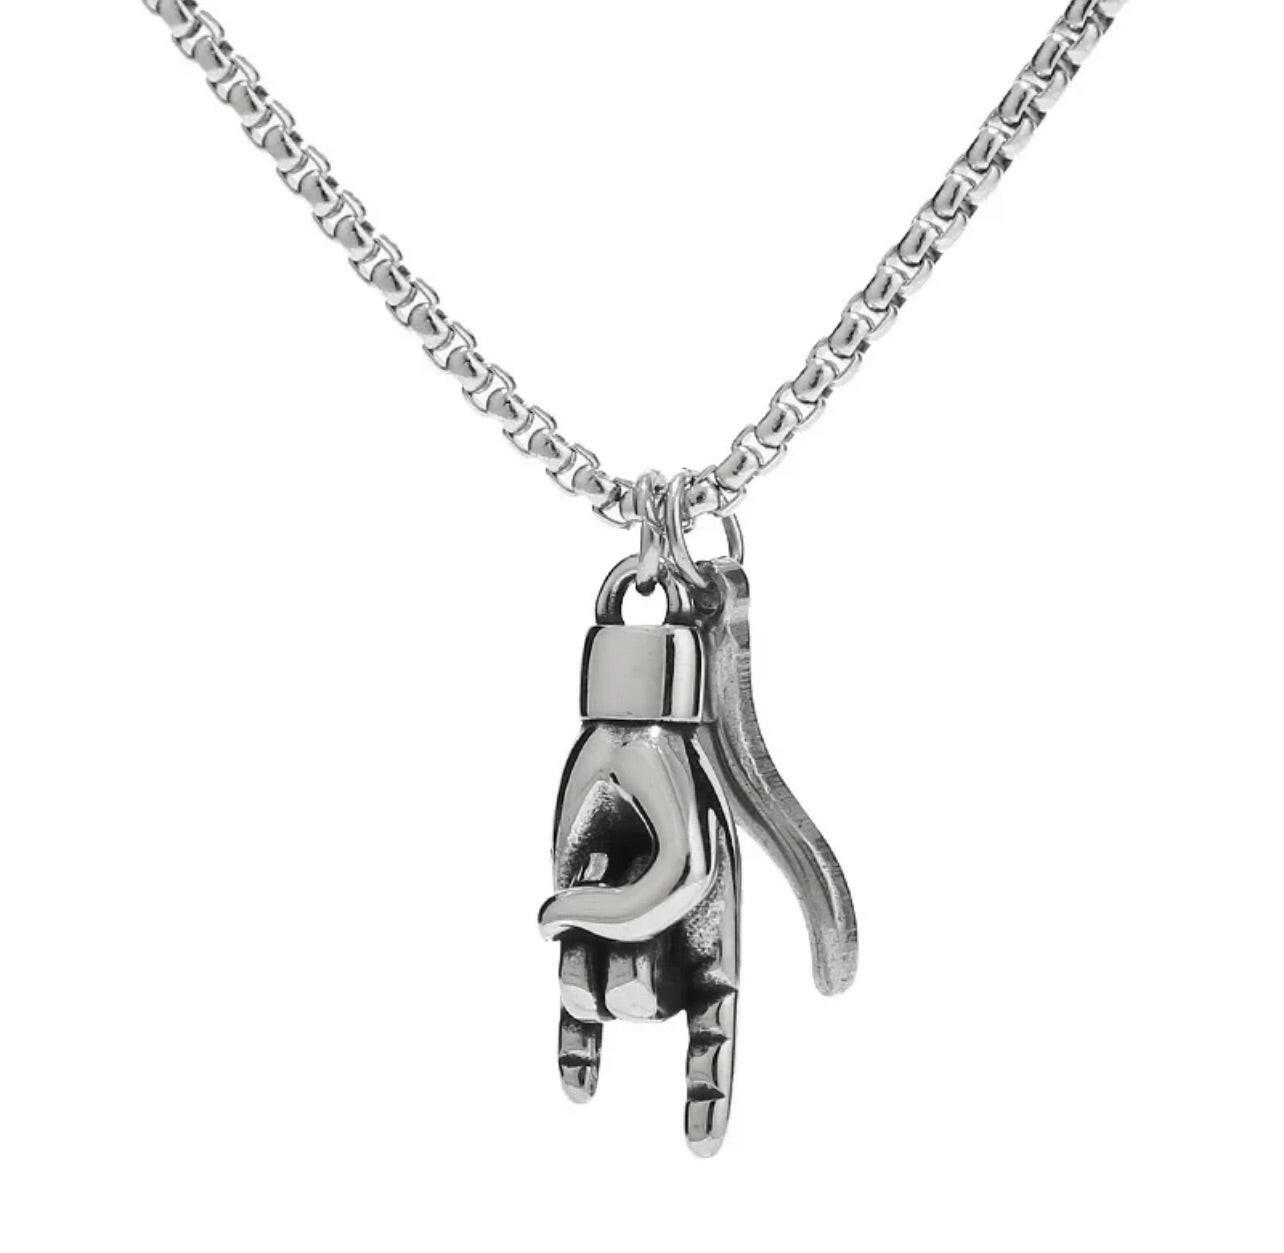 Good Luck Italian Hand and Horn Necklace in Stainless Steel.